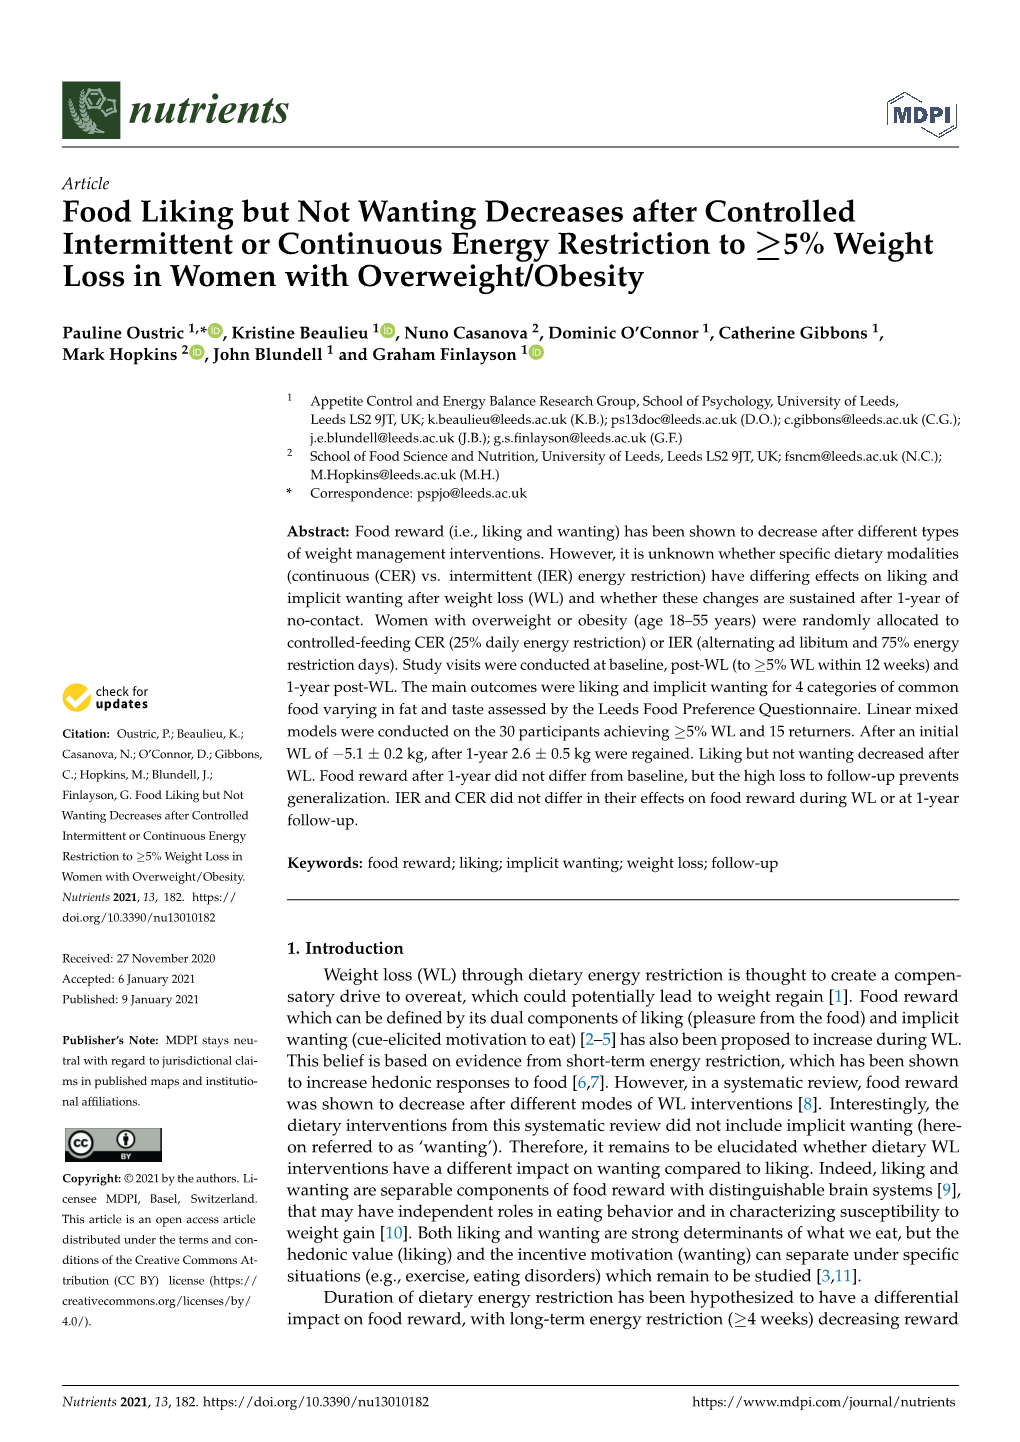 Food Liking but Not Wanting Decreases After Controlled Intermittent Or Continuous Energy Restriction to ≥5% Weight Loss in Women with Overweight/Obesity